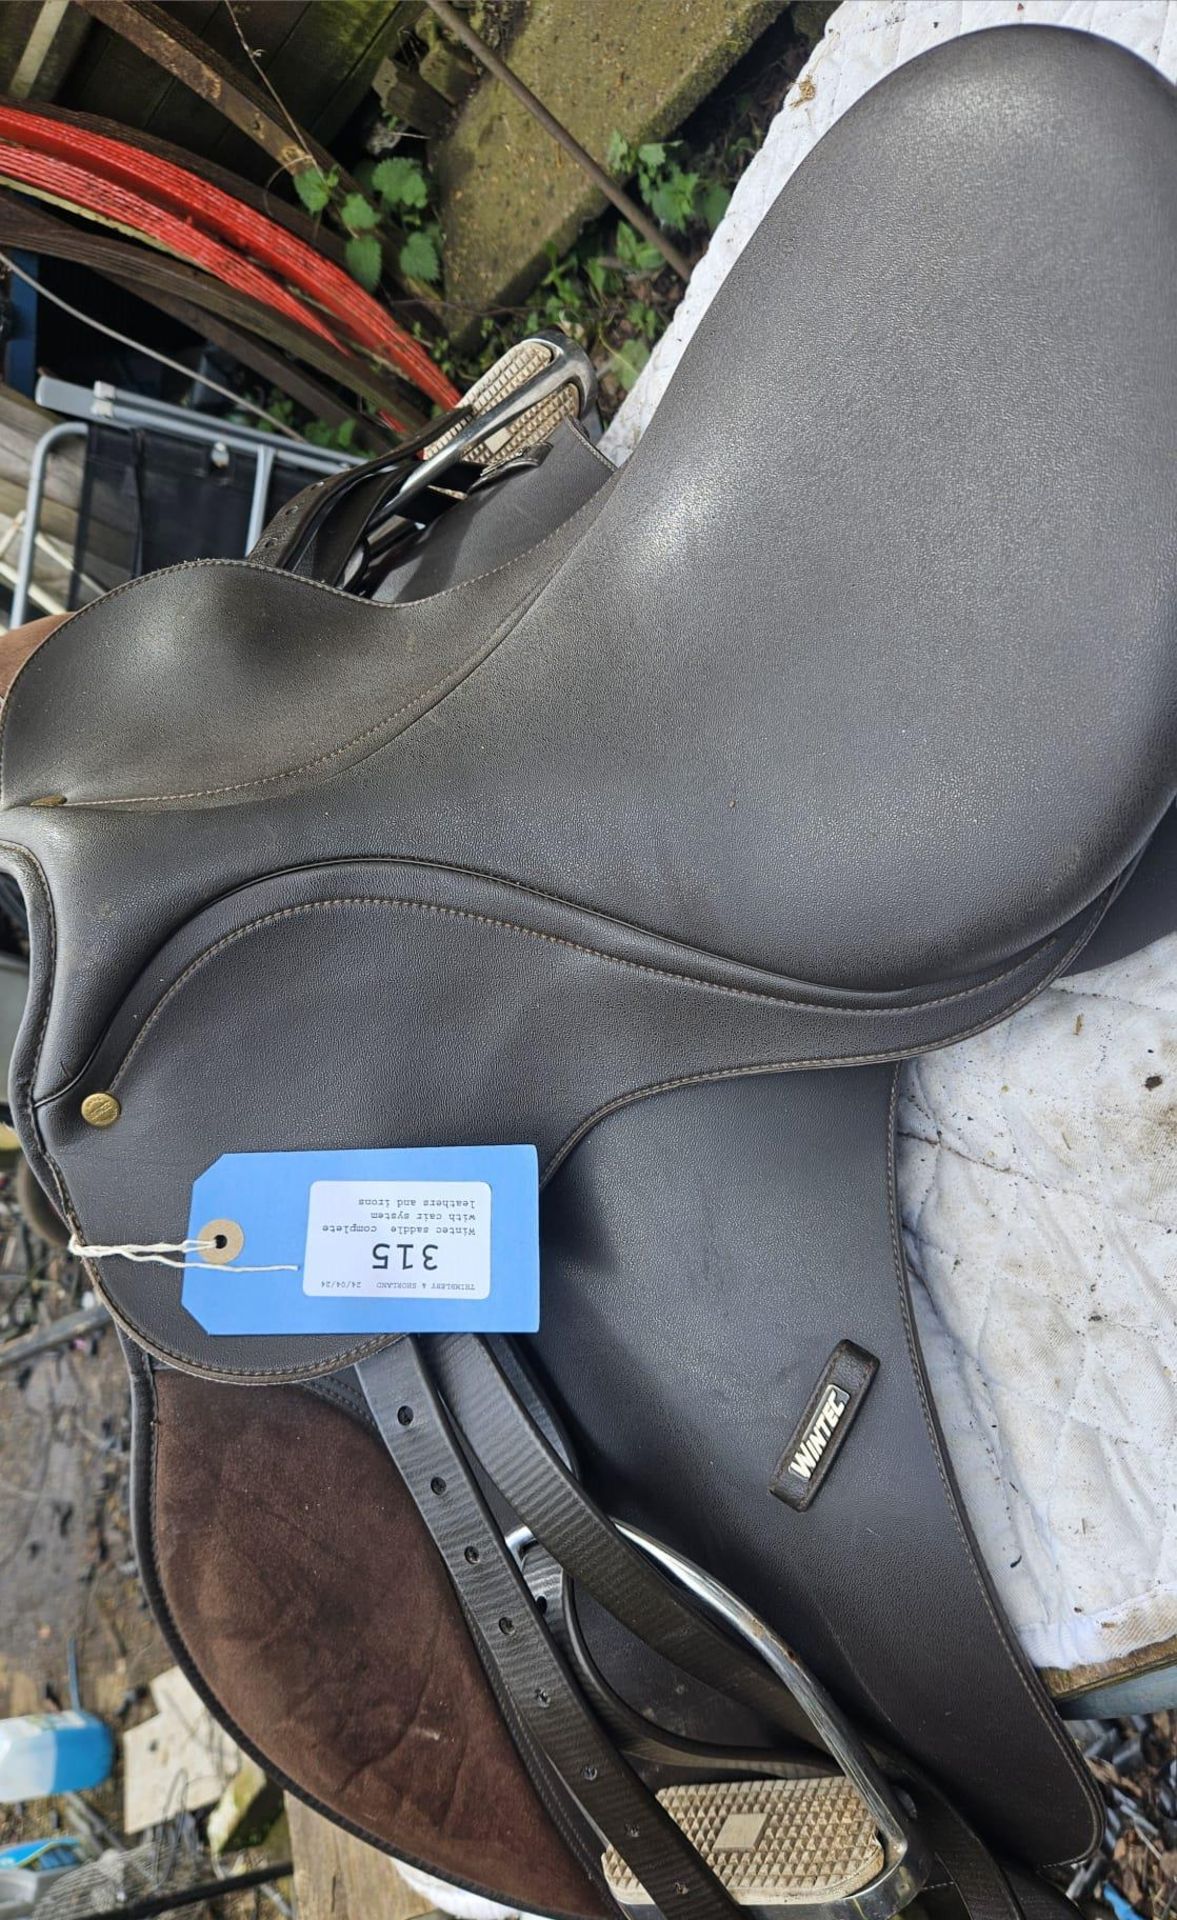 Wintec saddle, complete with cair system, leathers and irons